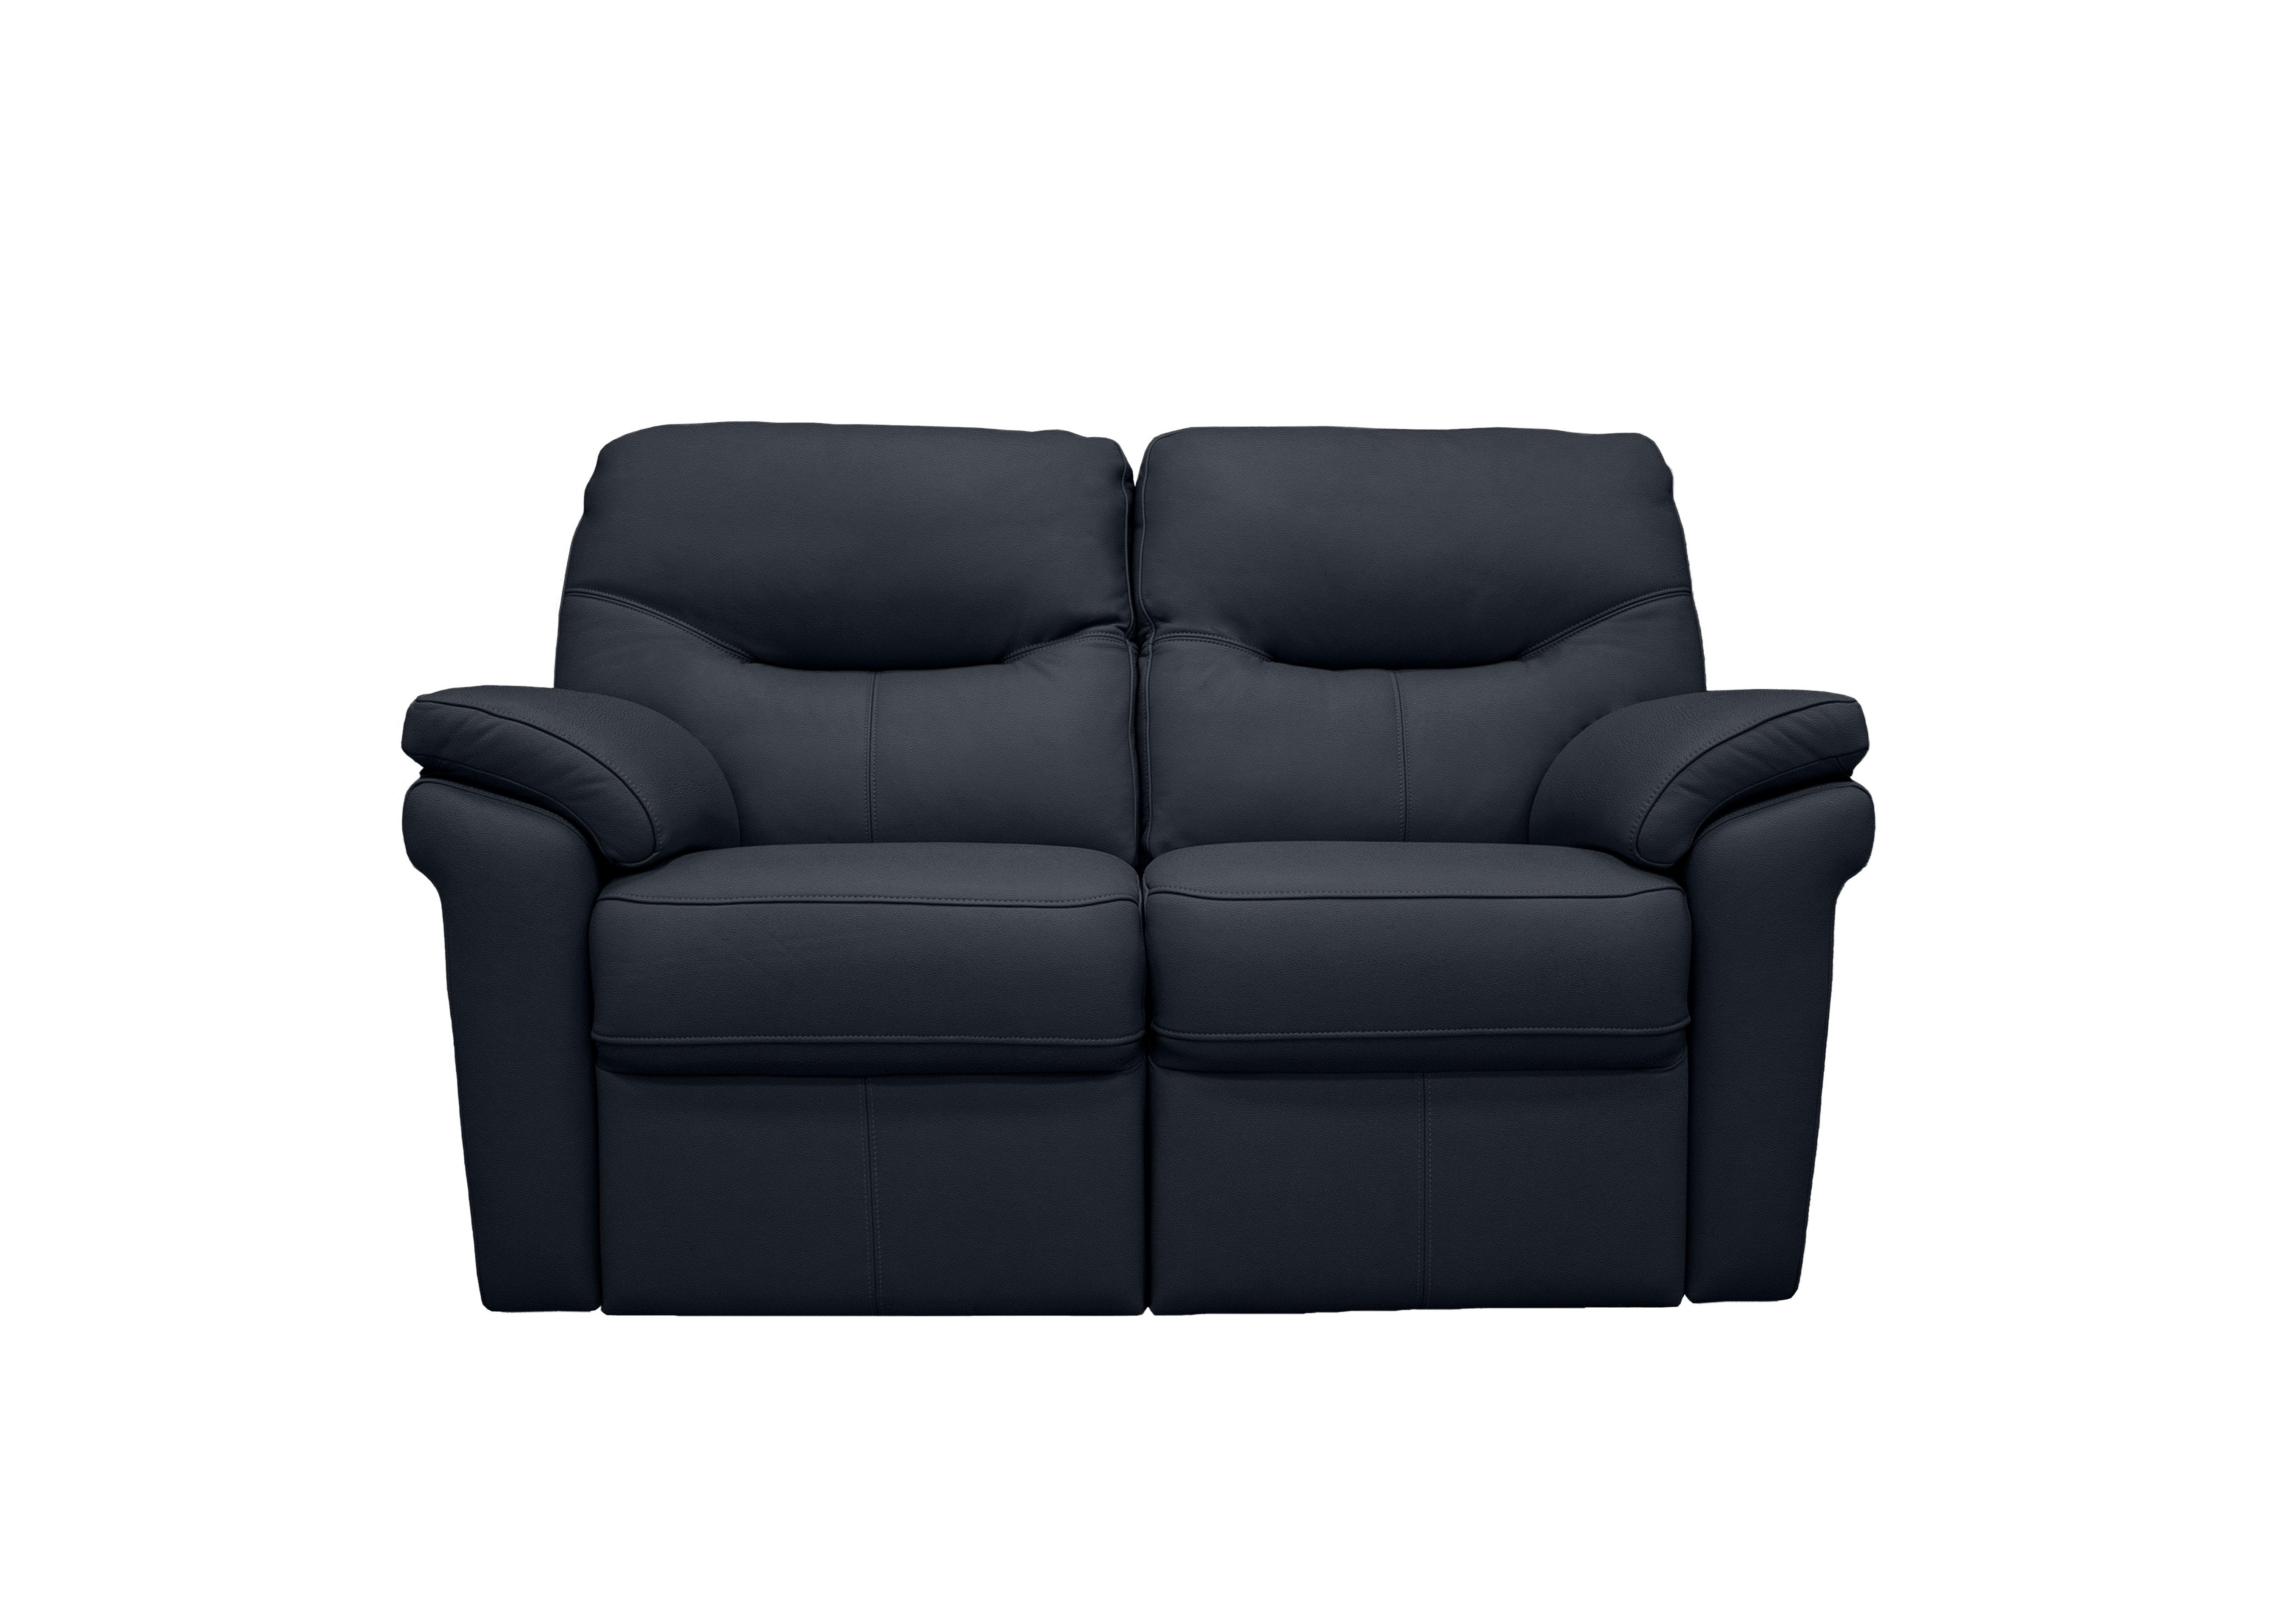 Seattle 2 Seater Leather Sofa in L851 Cambridge Navy on Furniture Village